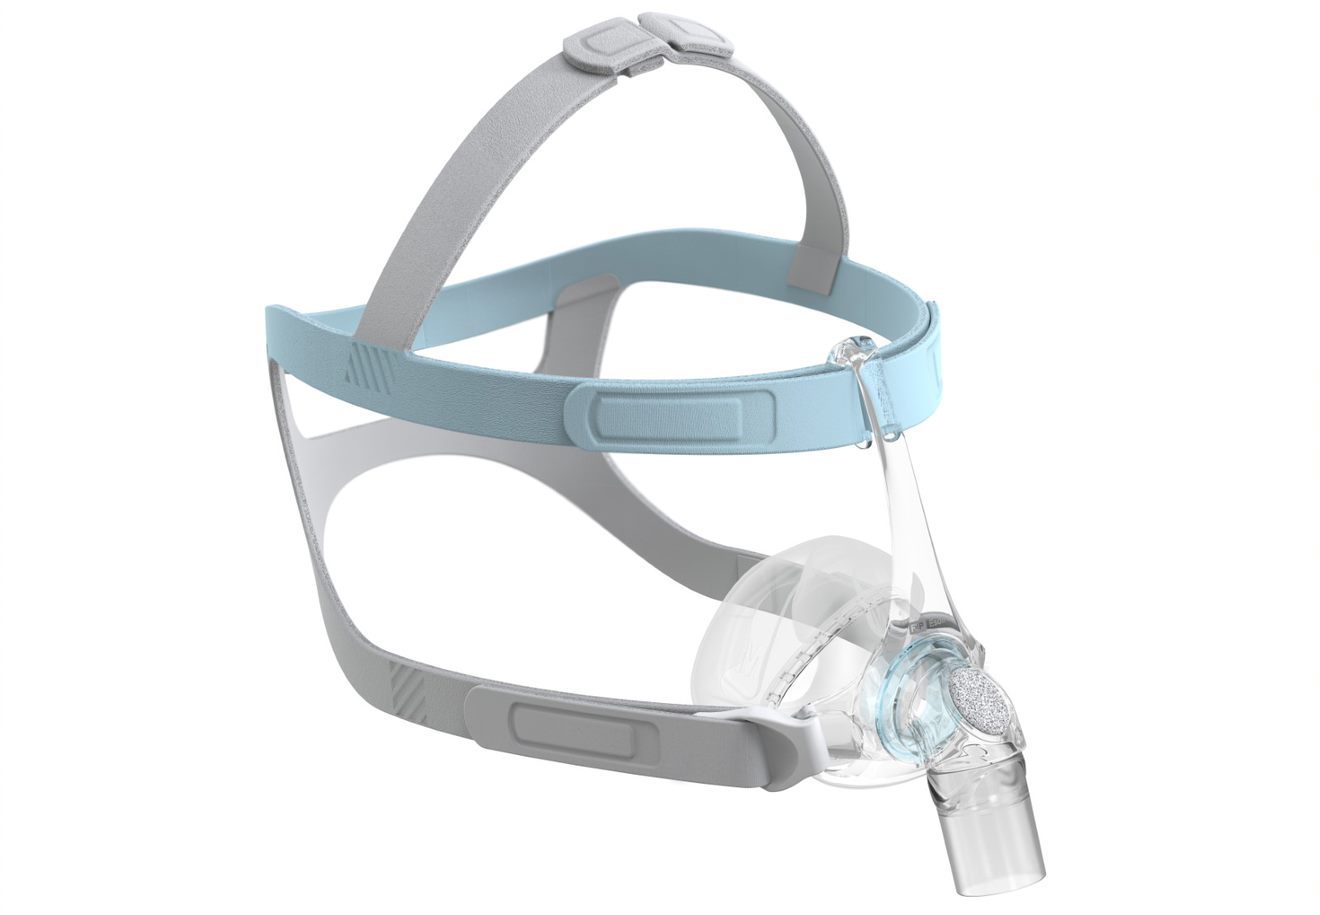 Fisher & Paykel's Eson 2 Nasal CPAP Mask full view from the side